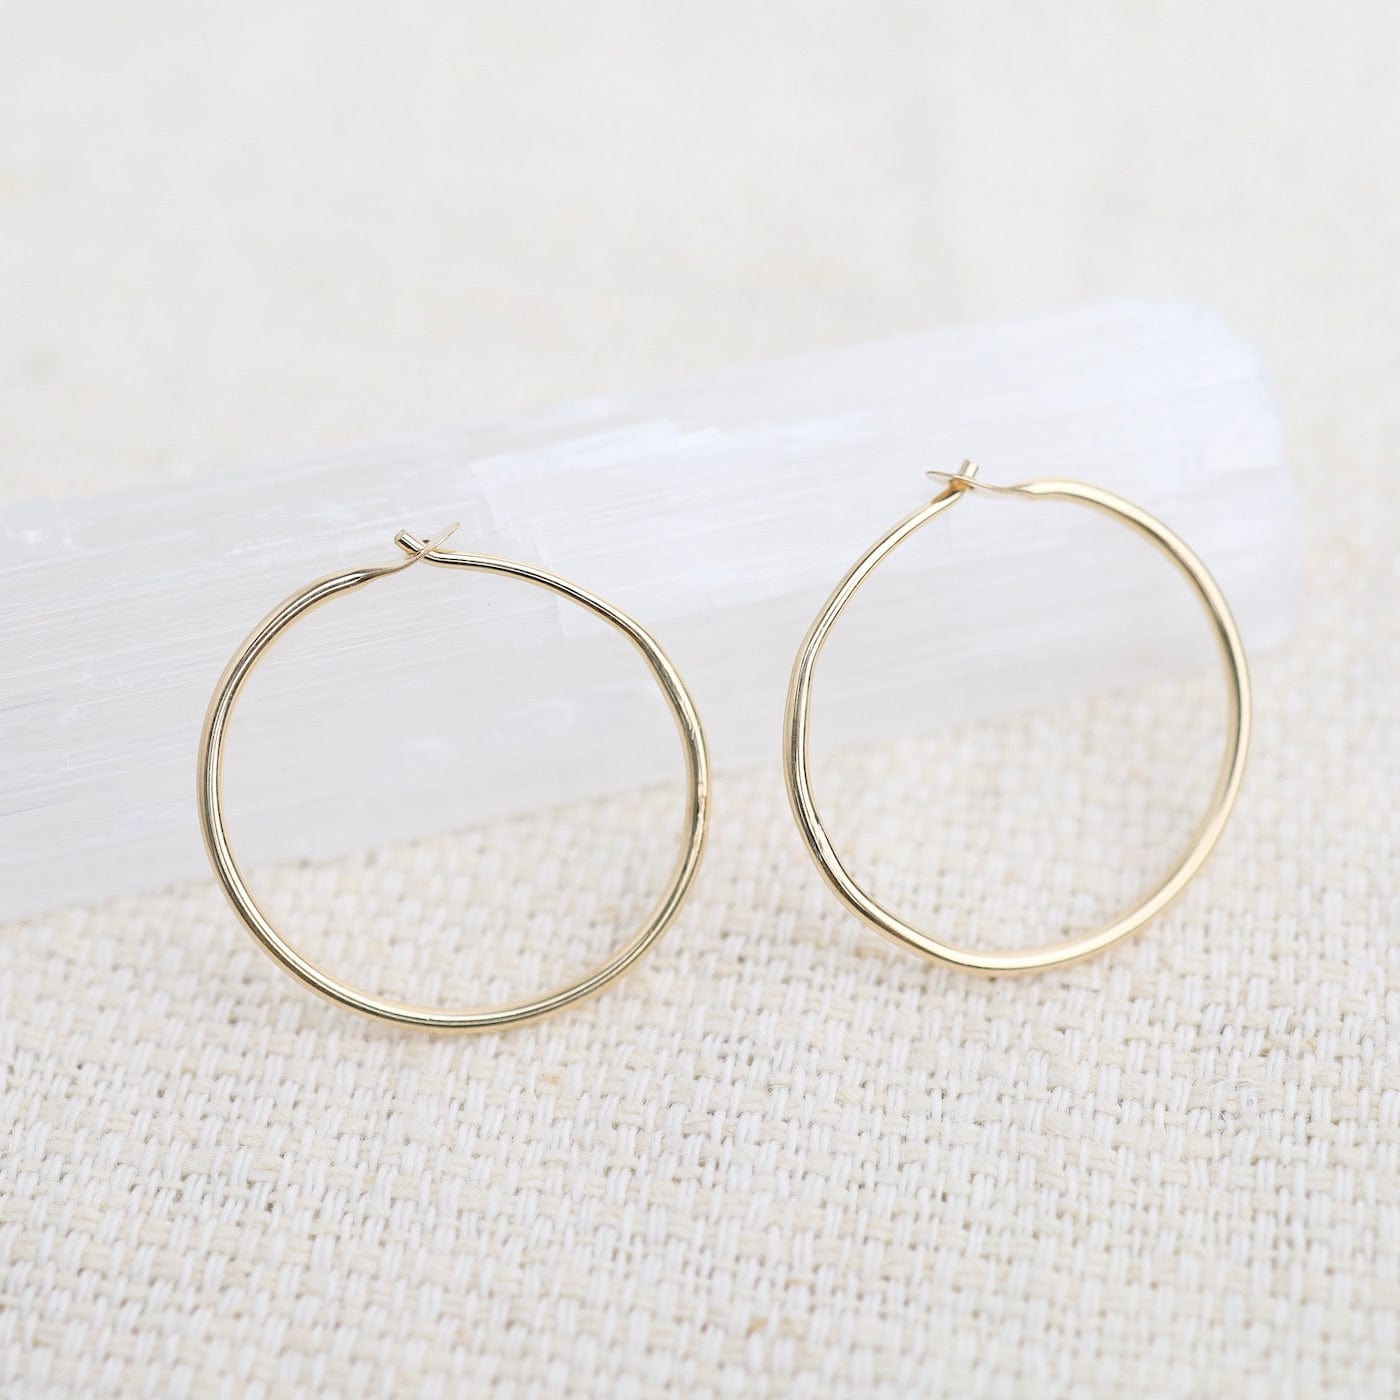 EAR-GF 24mm Rounded Gold Filled Hoops